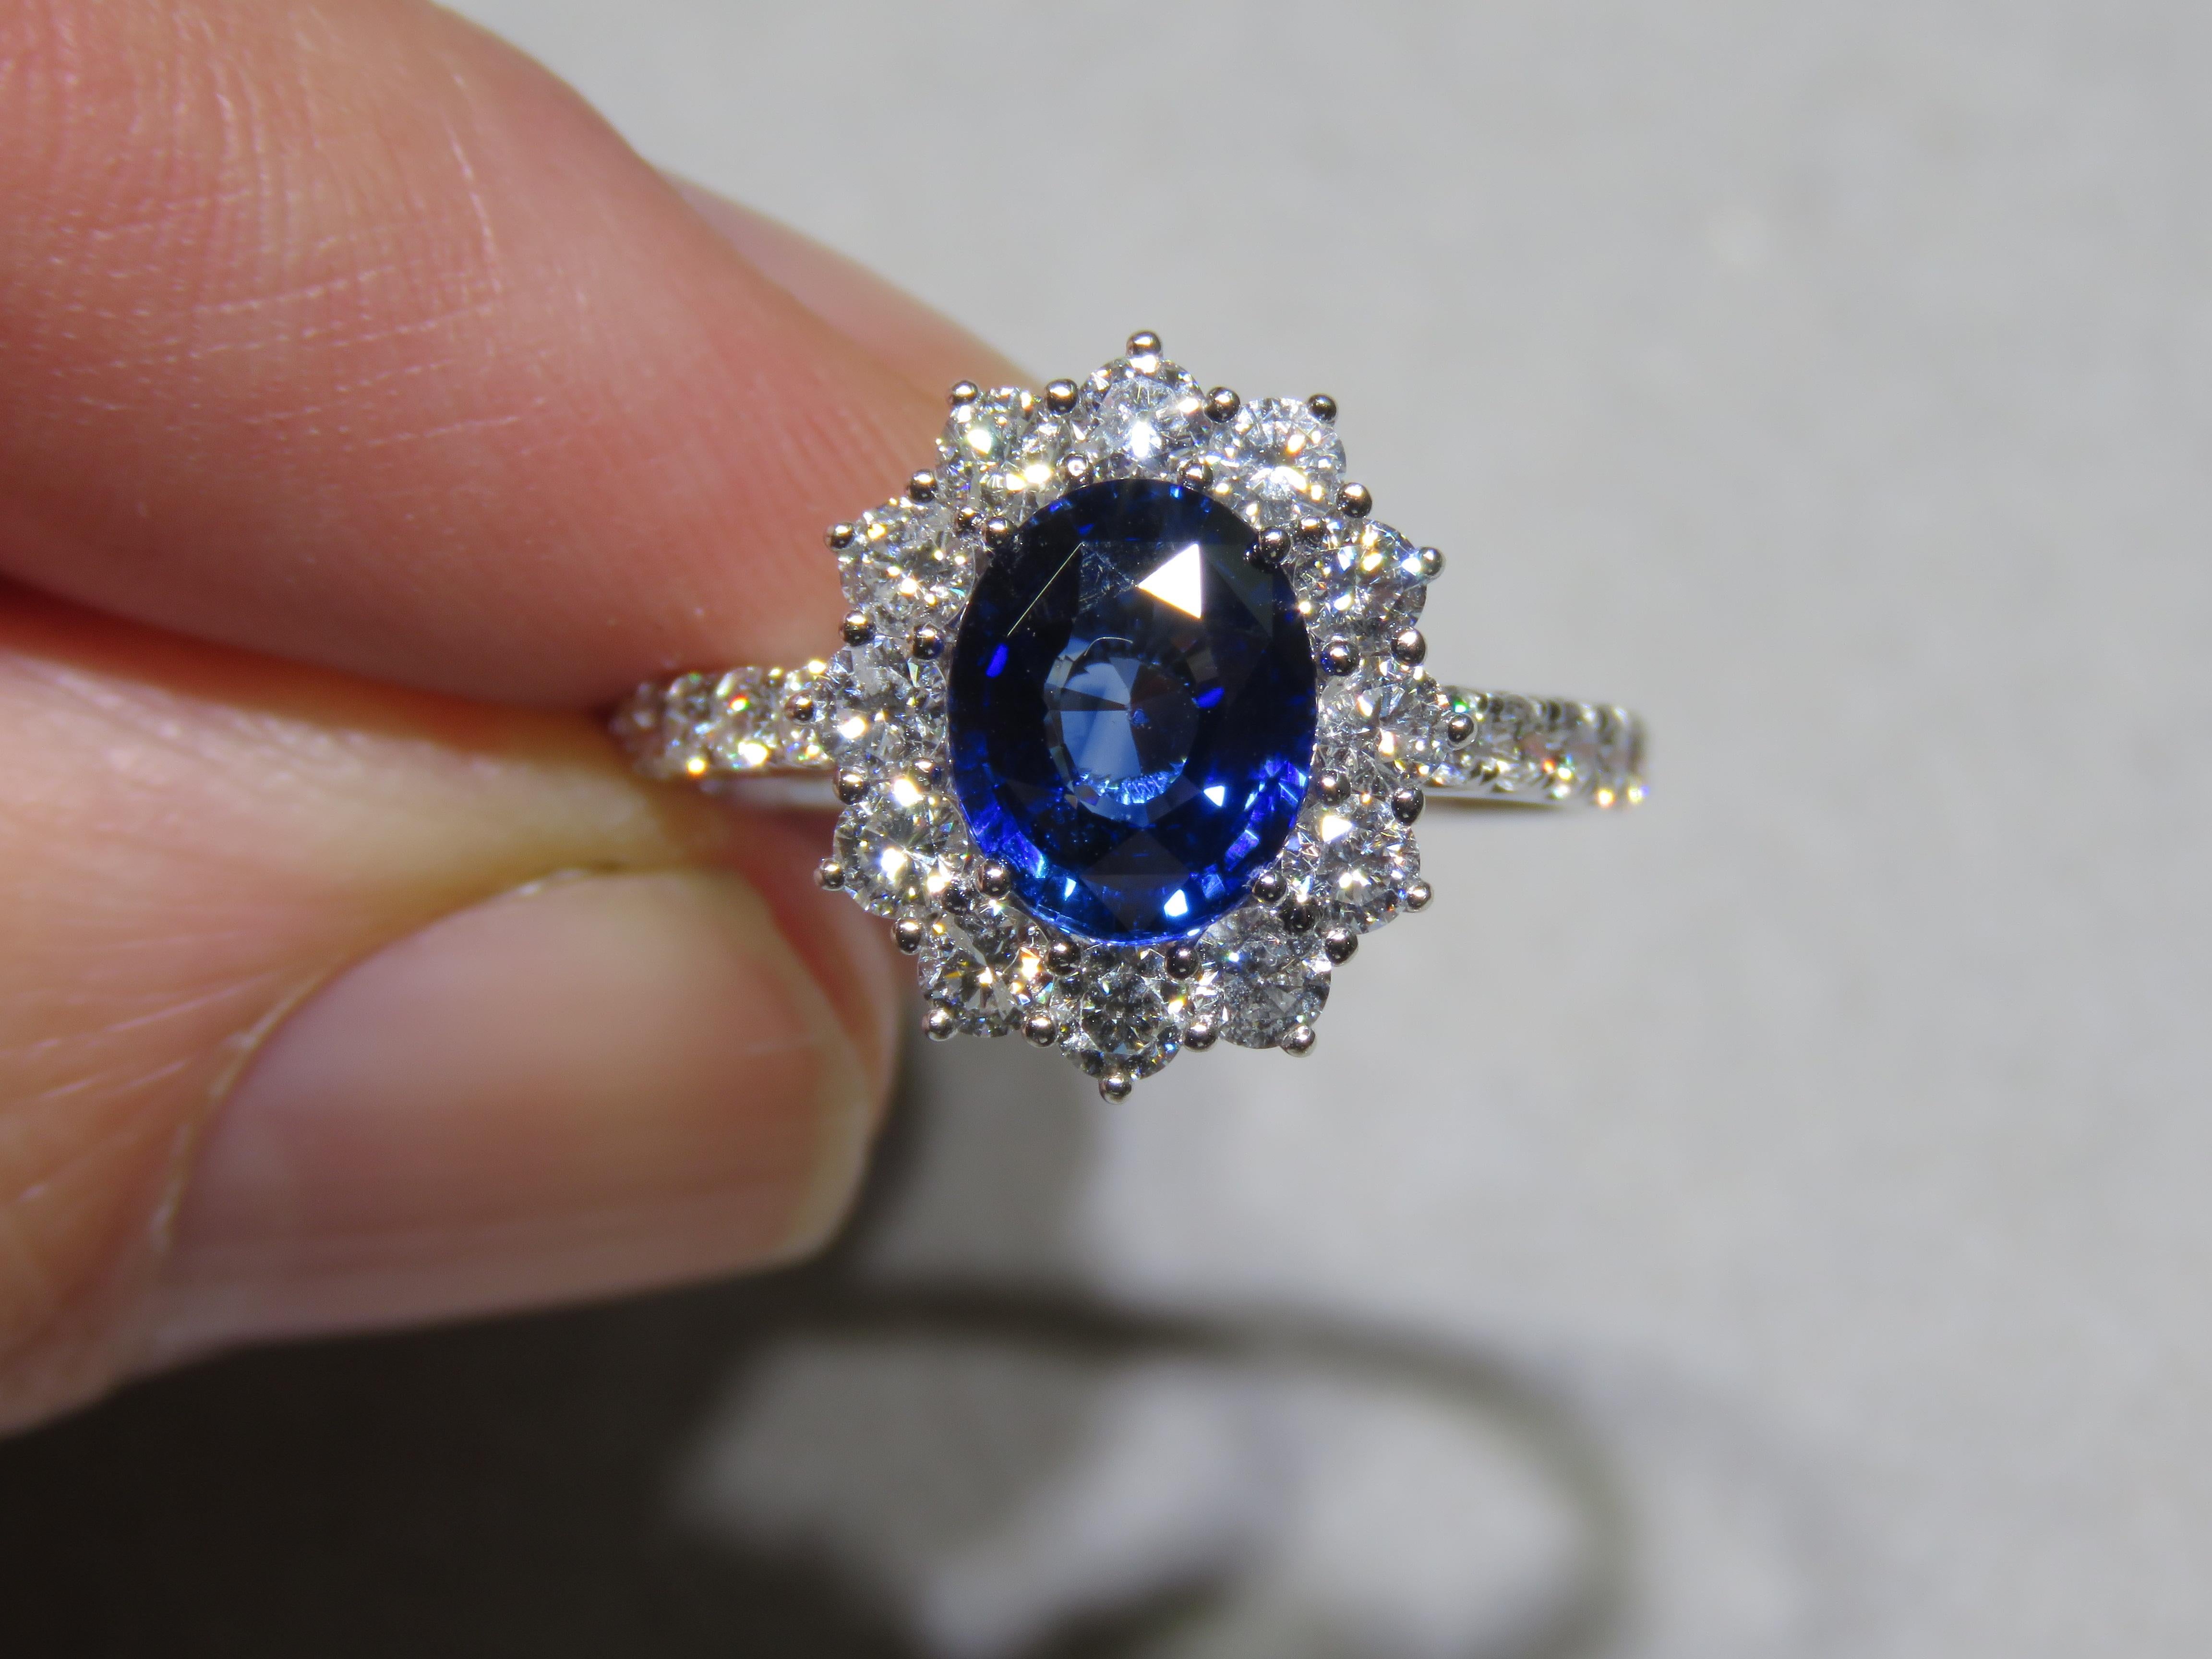 The Following Item we are offering is a Rare Important Spectacular and Brilliant 18KT Gold Large Gorgeous Sapphire Diamond Ring. Ring consists of a Rare Fine Magnificent Rare Blue Sapphire surrounded with Glittering Diamonds. T.C.W. Approx